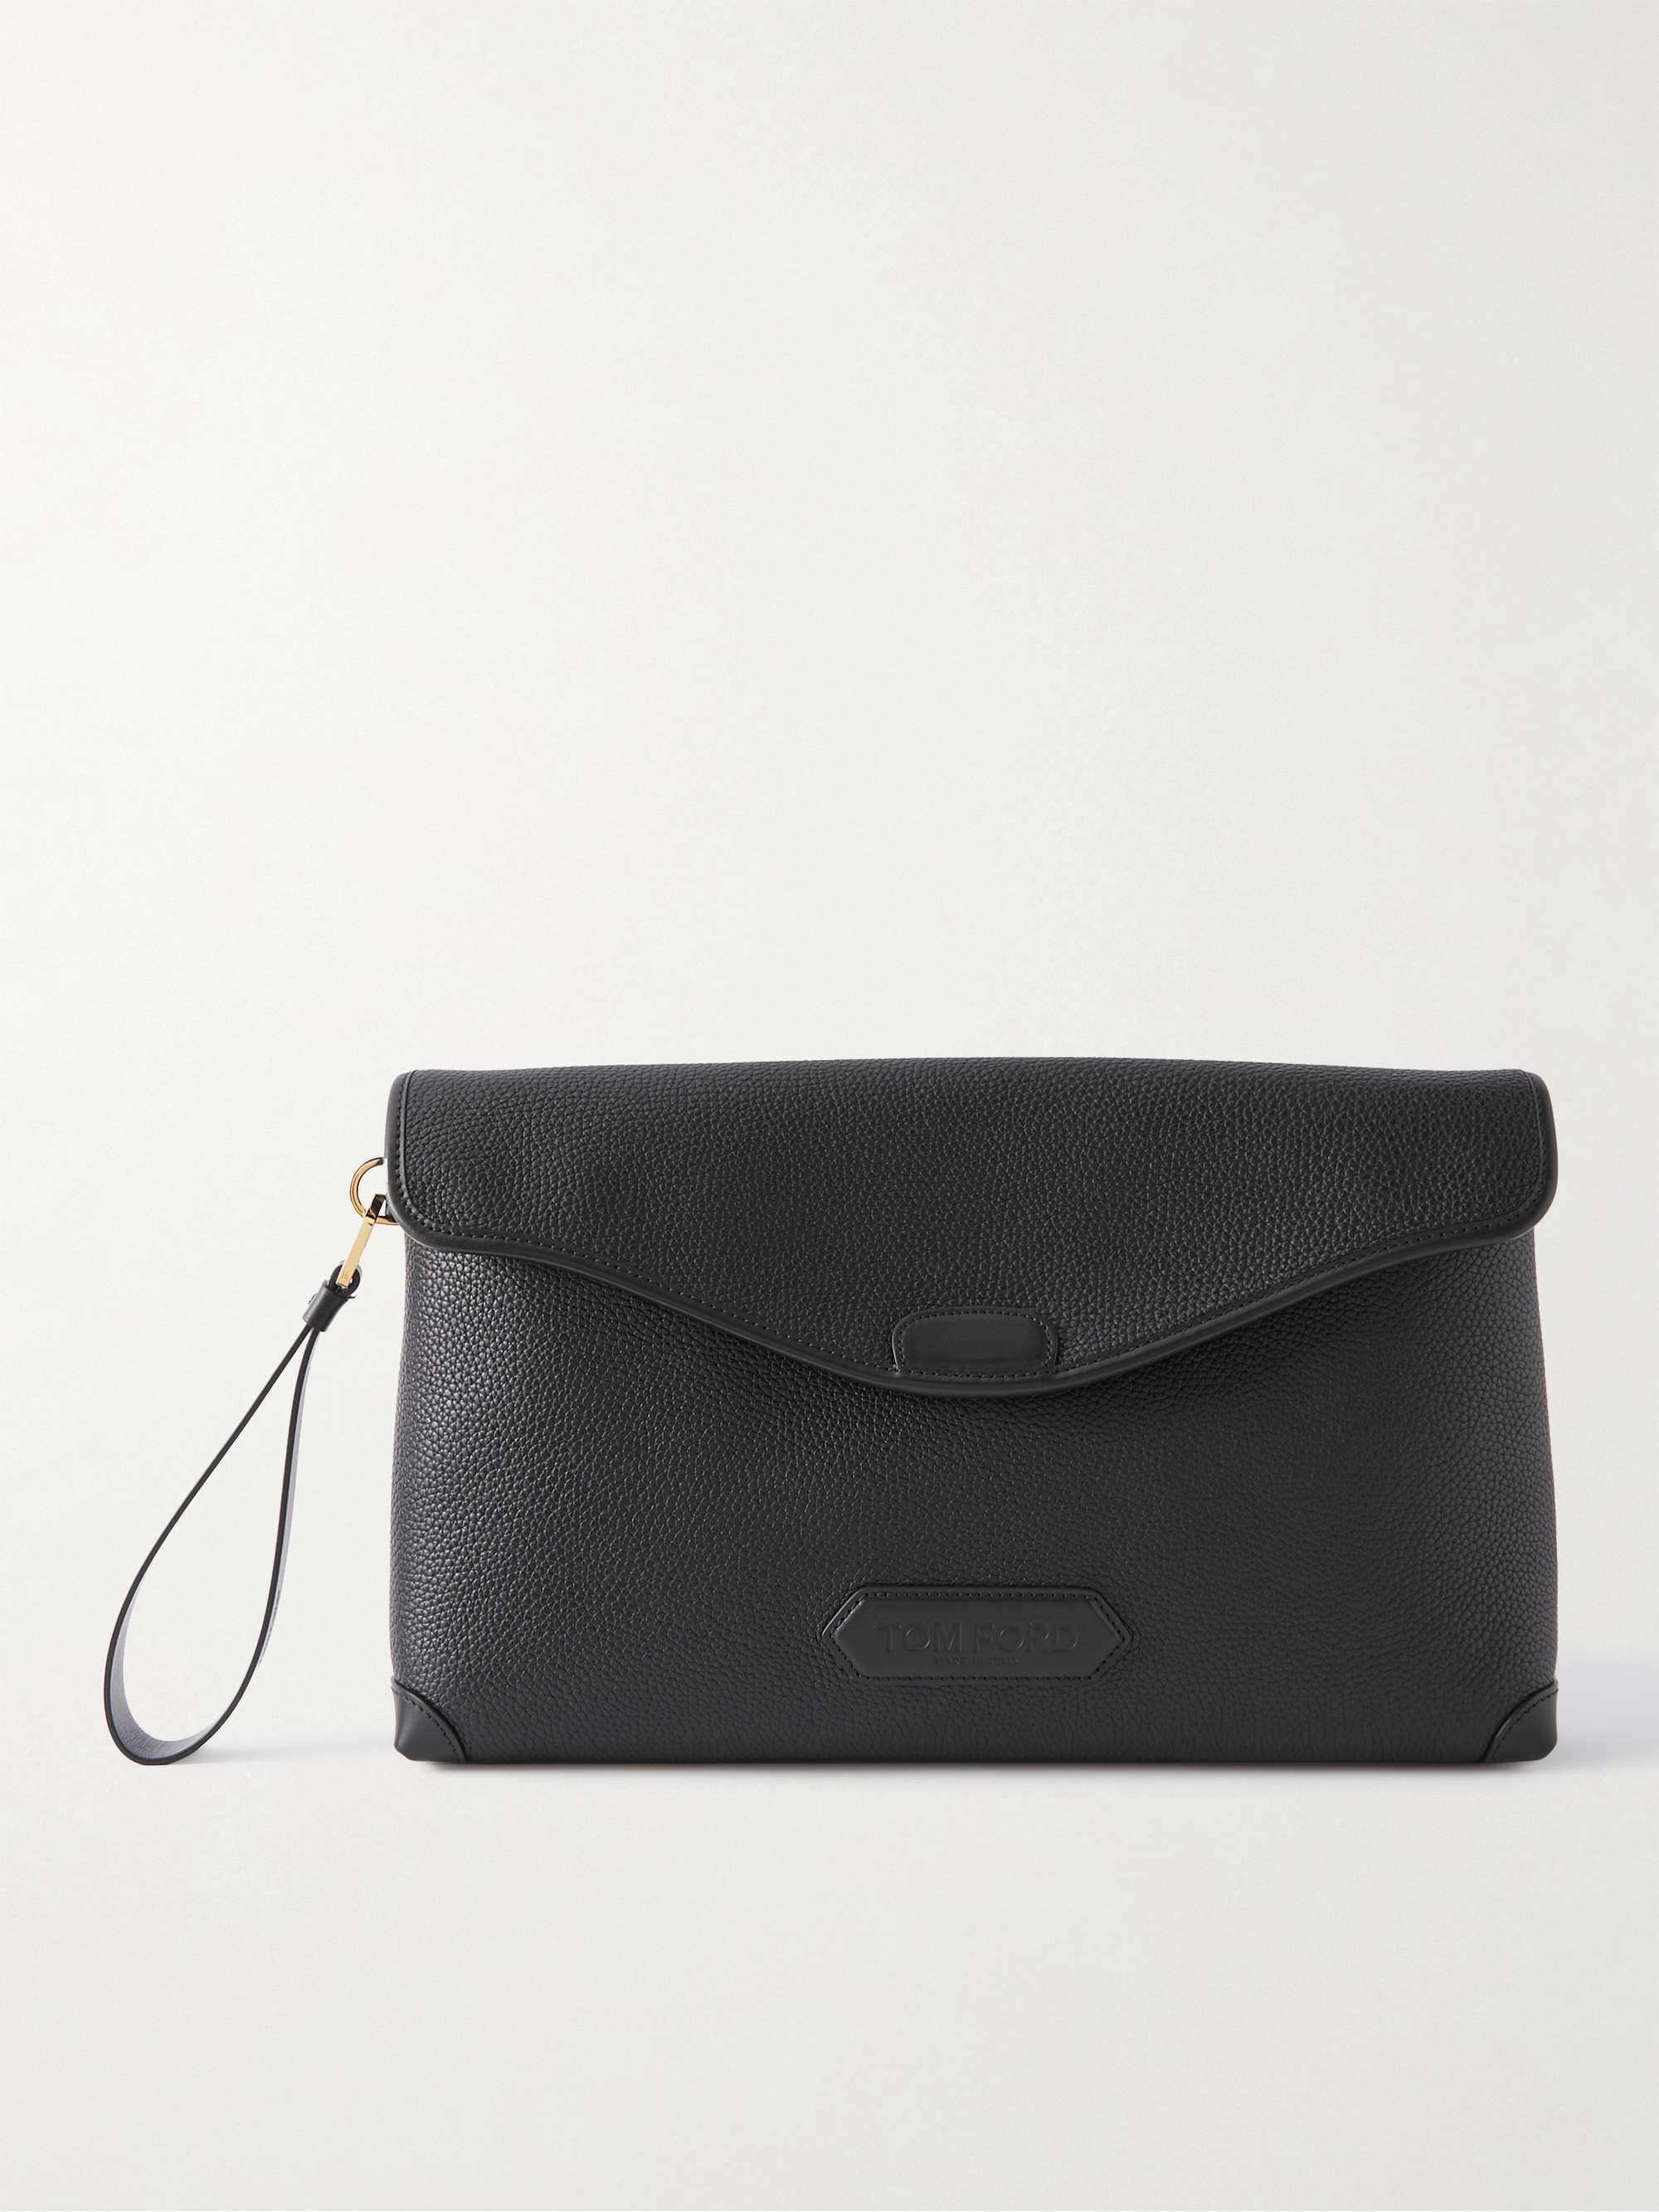 TOM FORD Full-Grain Leather Pouch